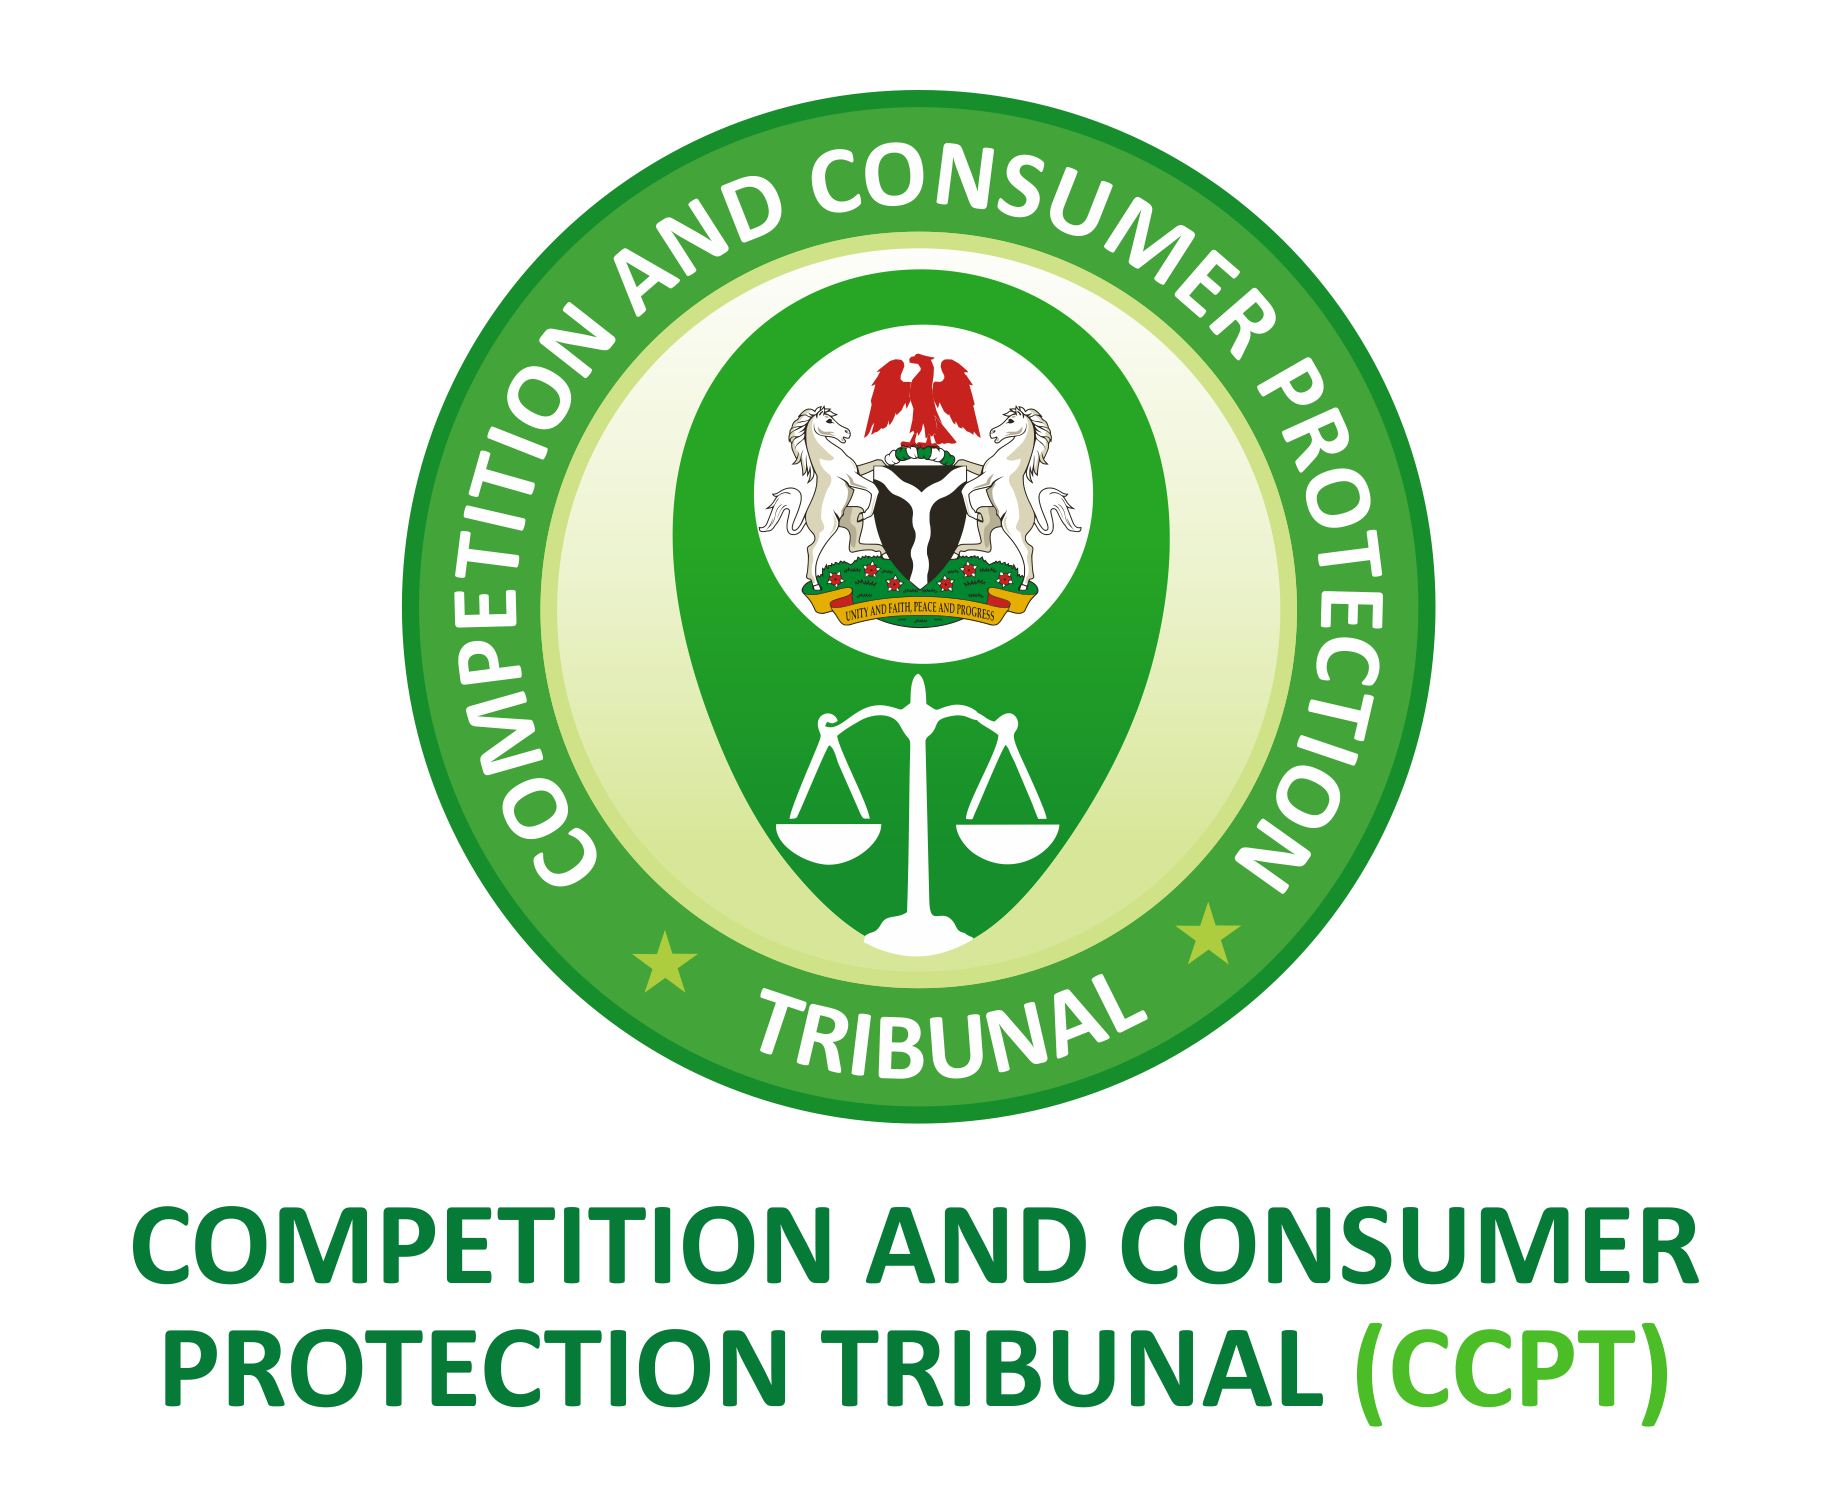 The Competition and Consumer Protection Tribunal